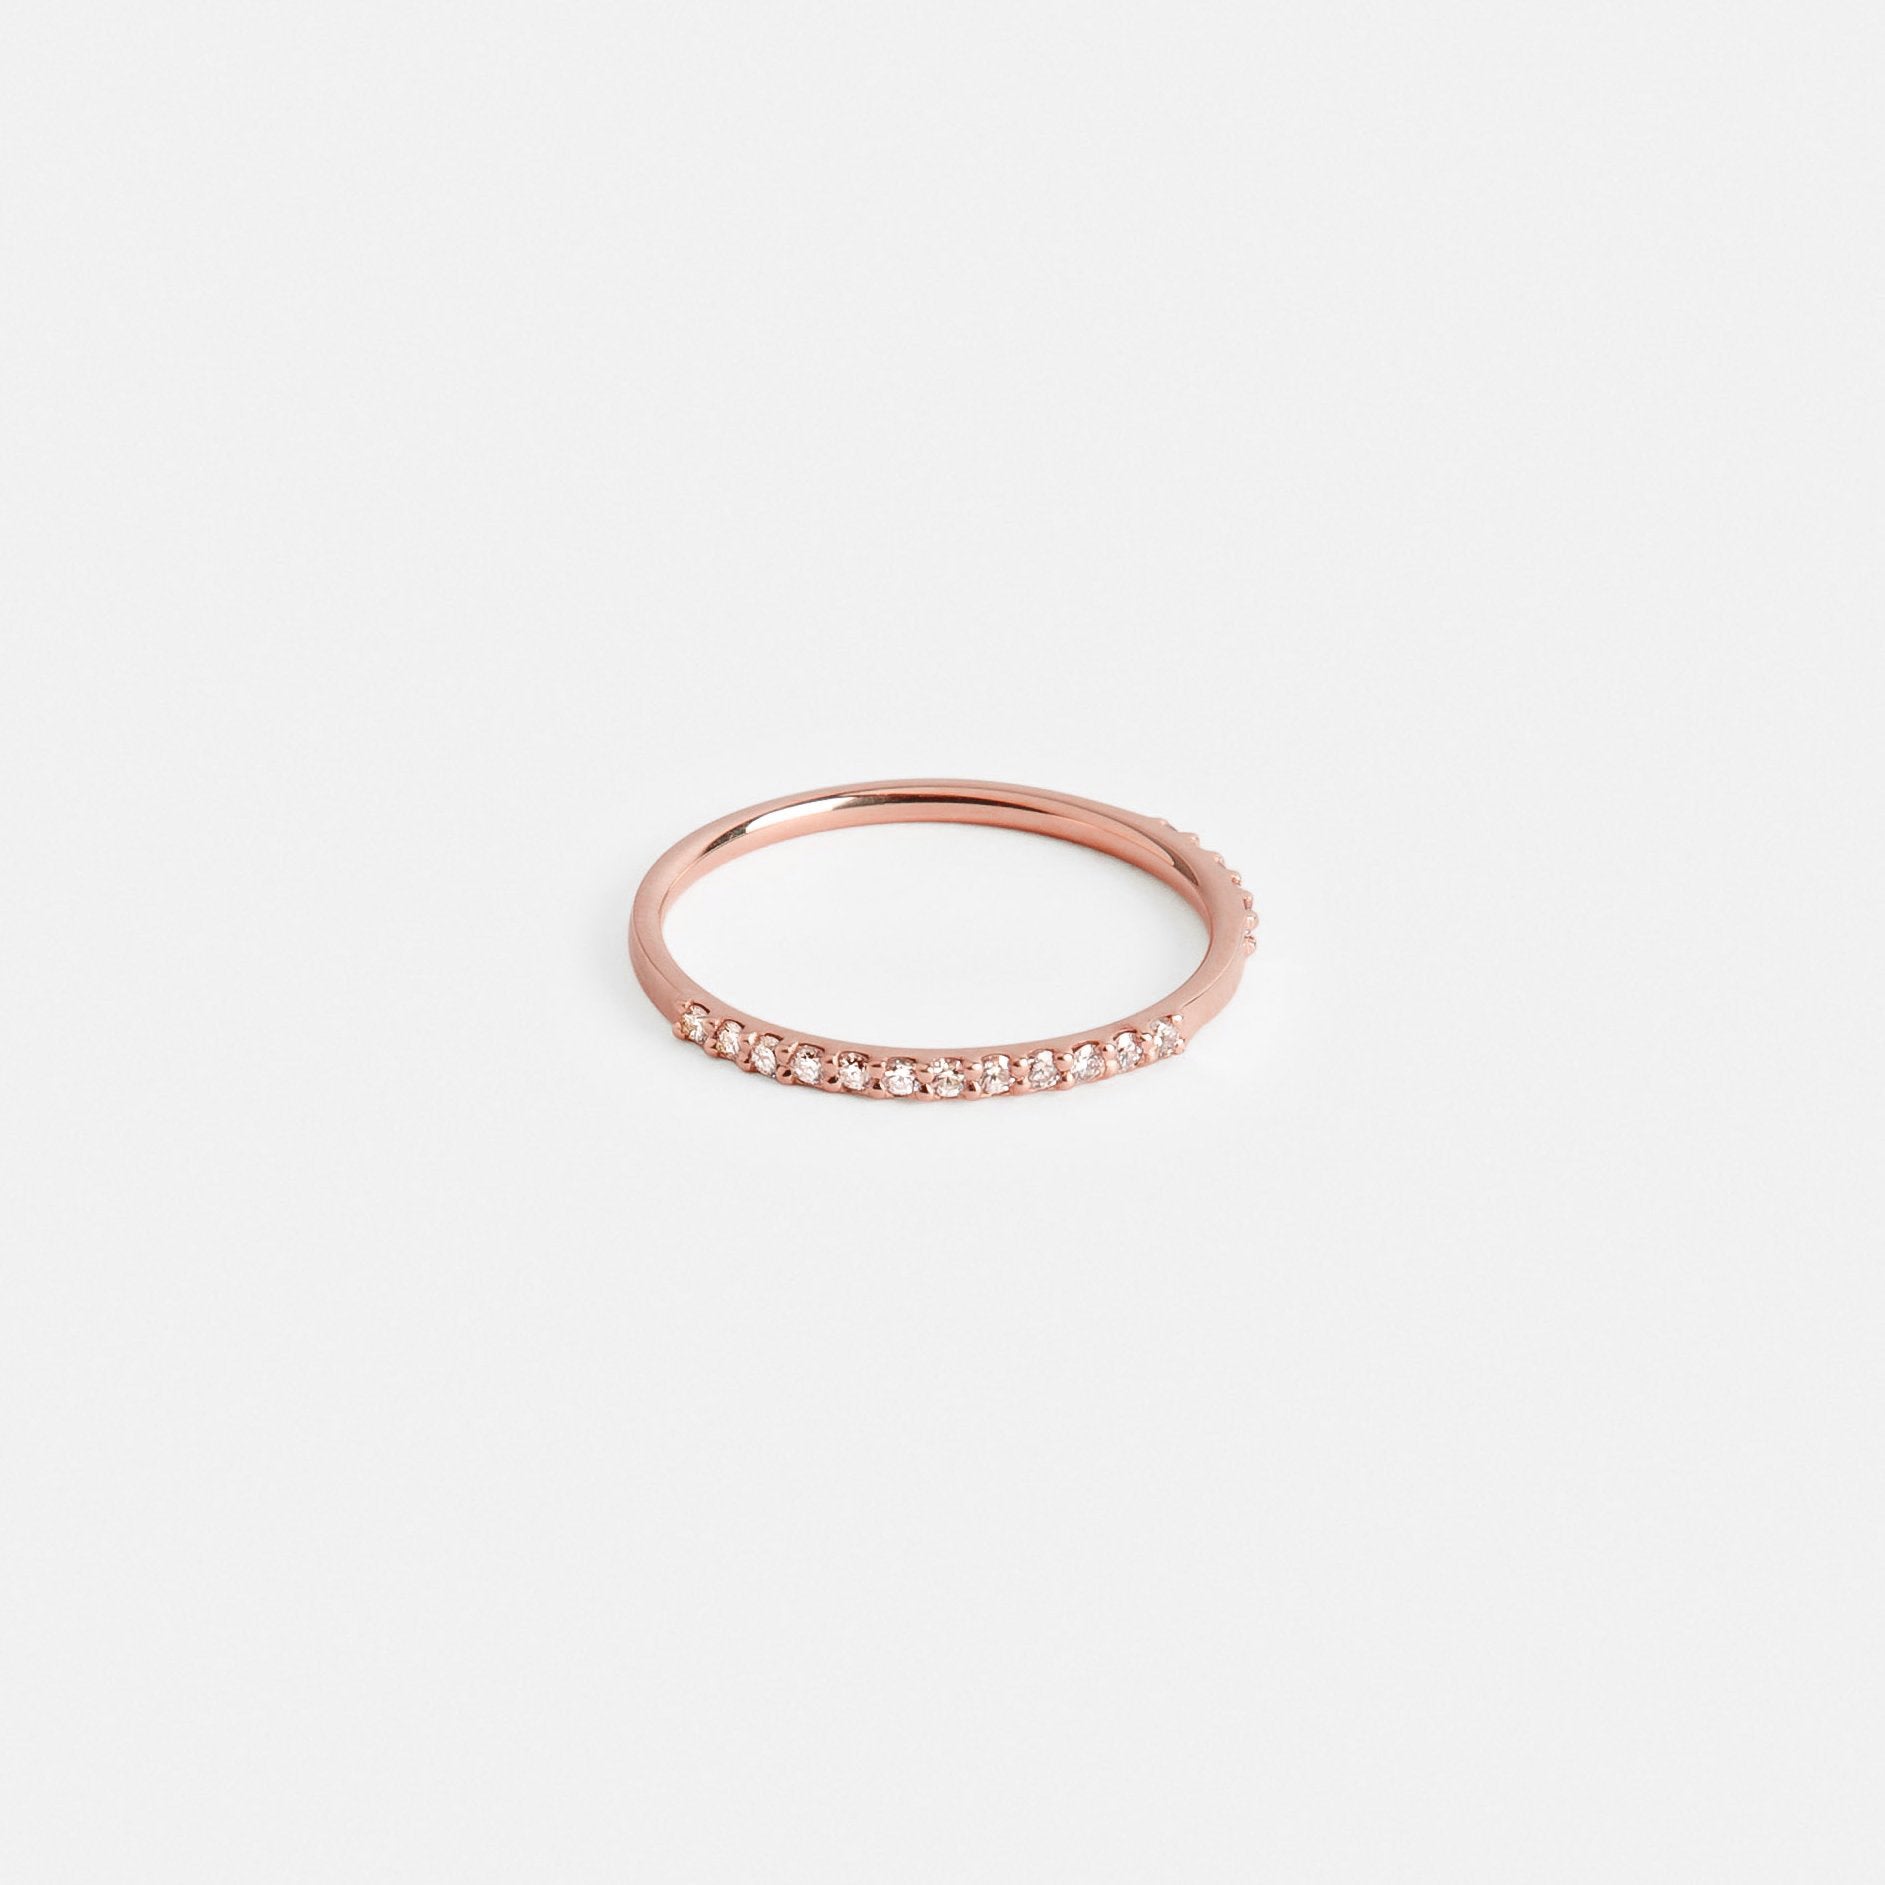 Row Handmade Ring in 14k Rose Gold set with White Diamonds By SHW Fine Jewelry NYC